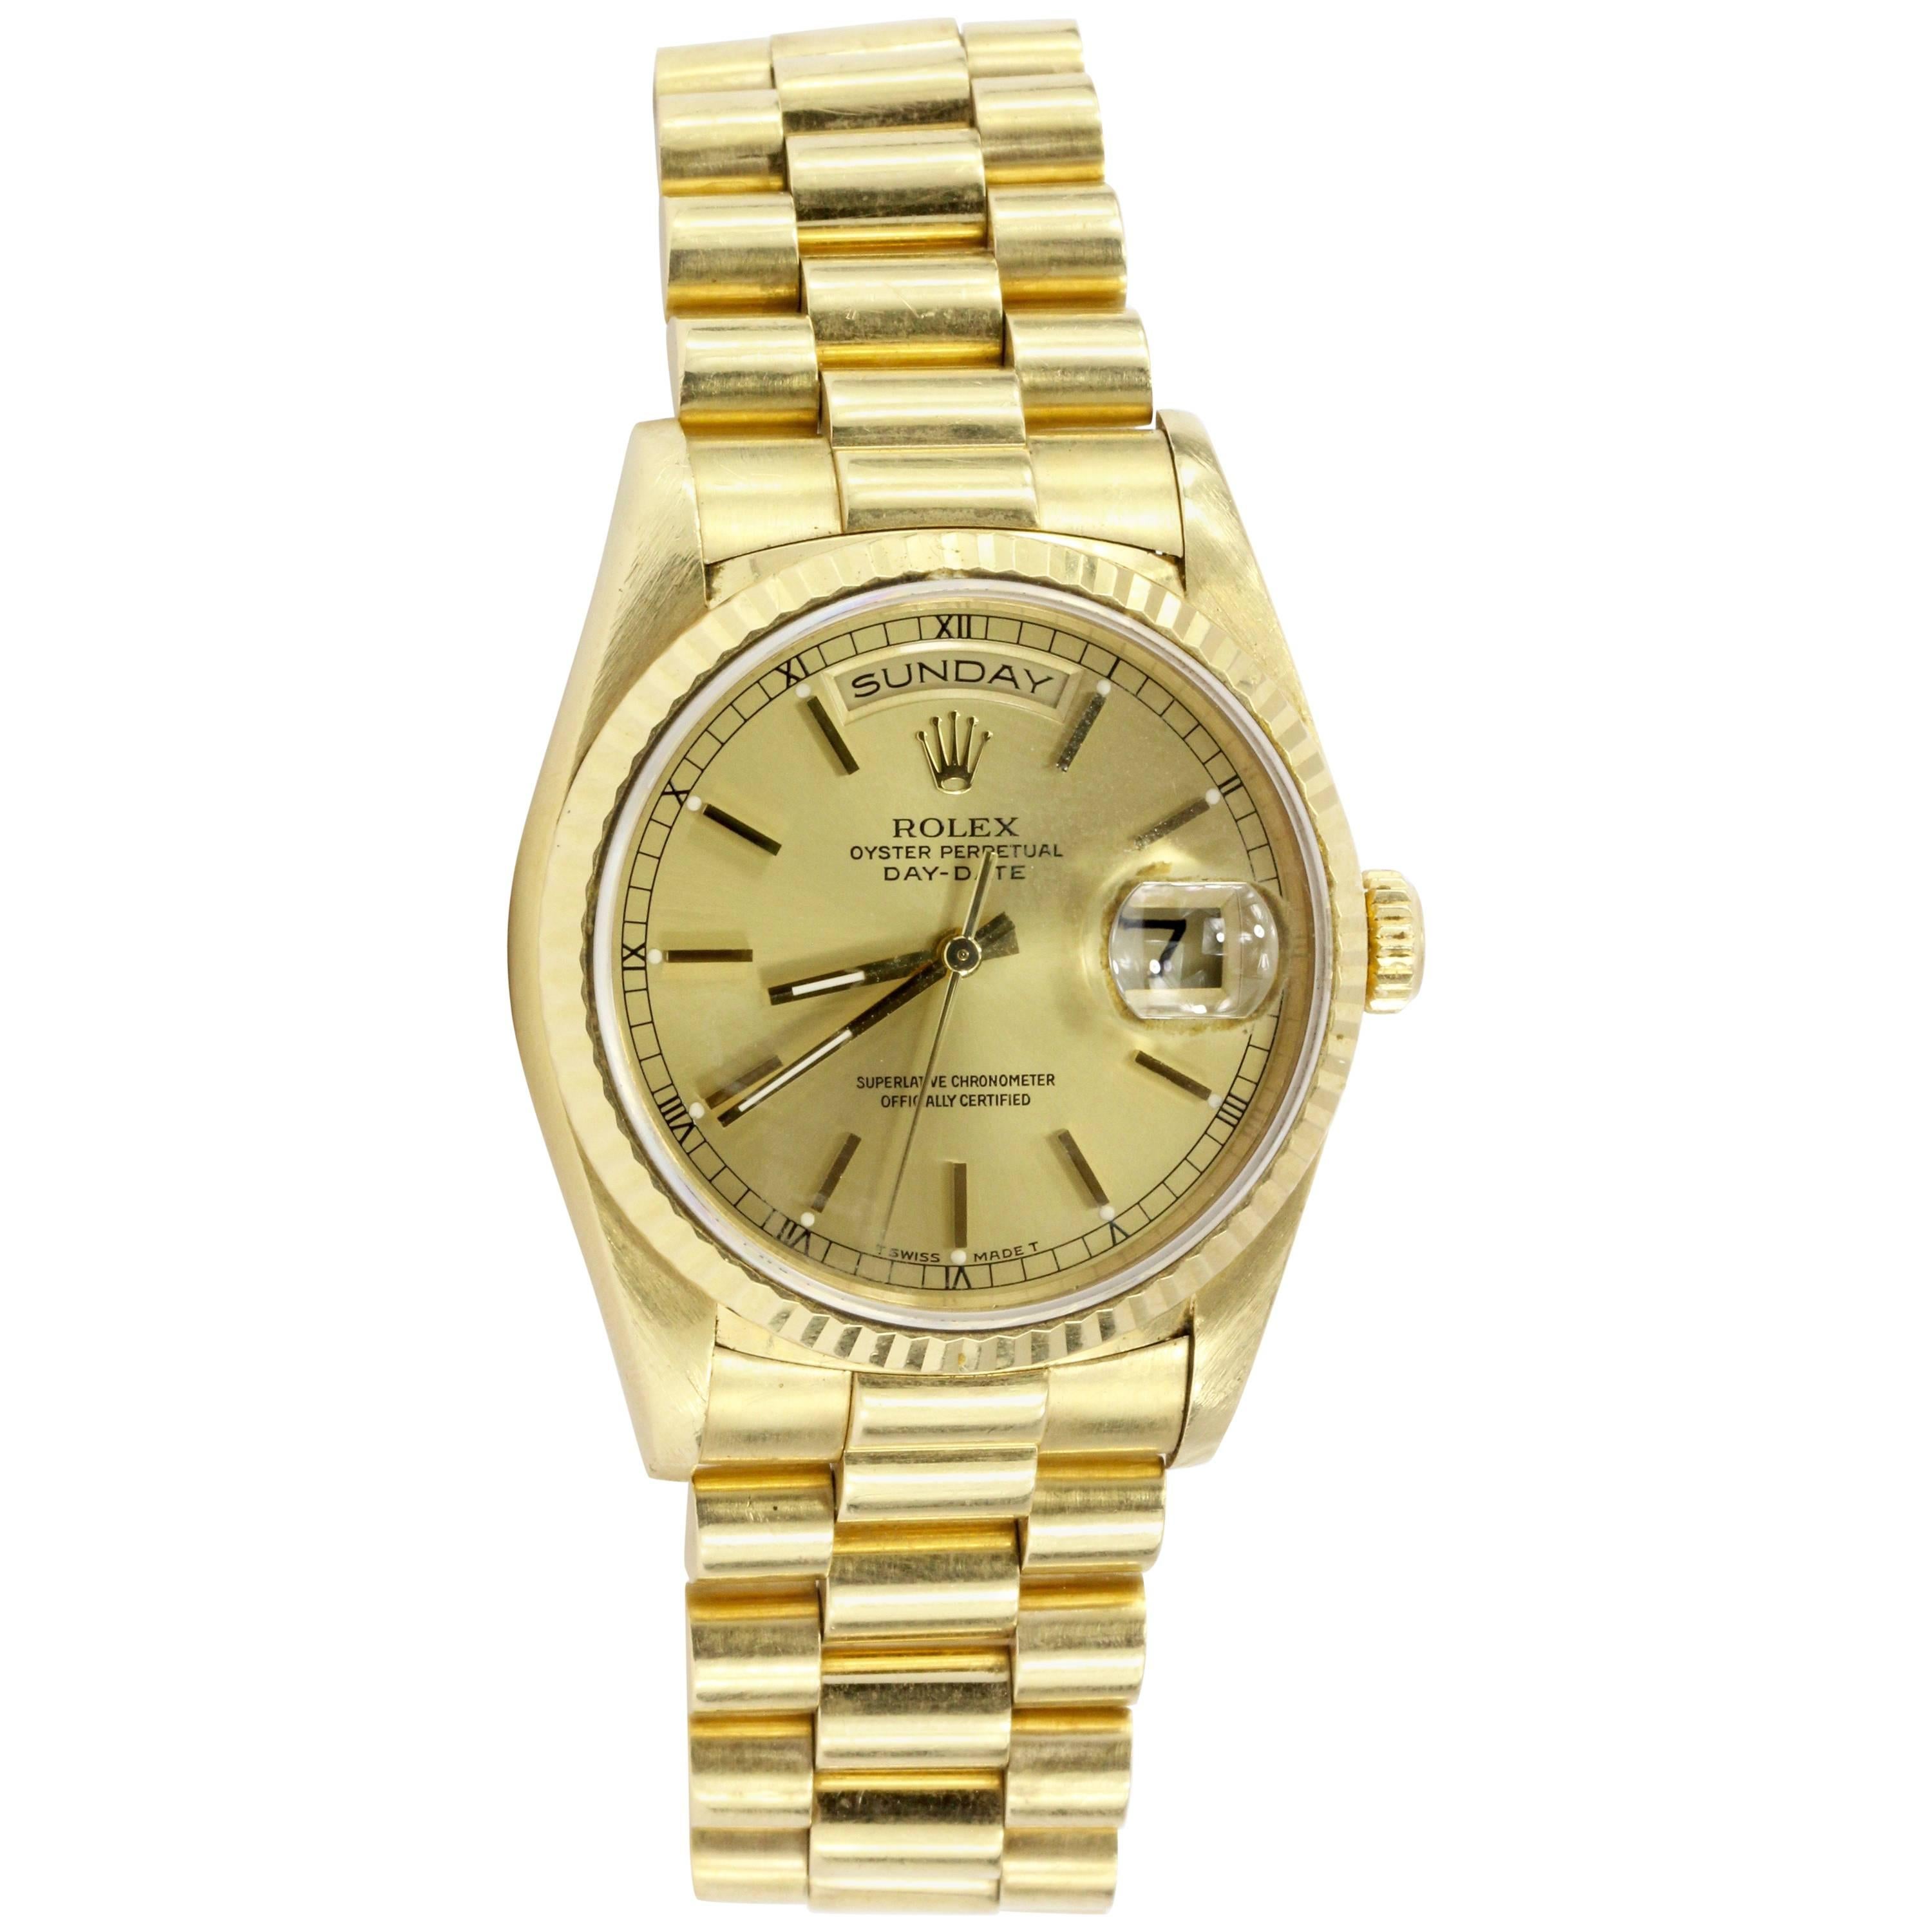 Rolex Yellow Gold Day-Date Presidential Automatic Wristwatch Ref 18238